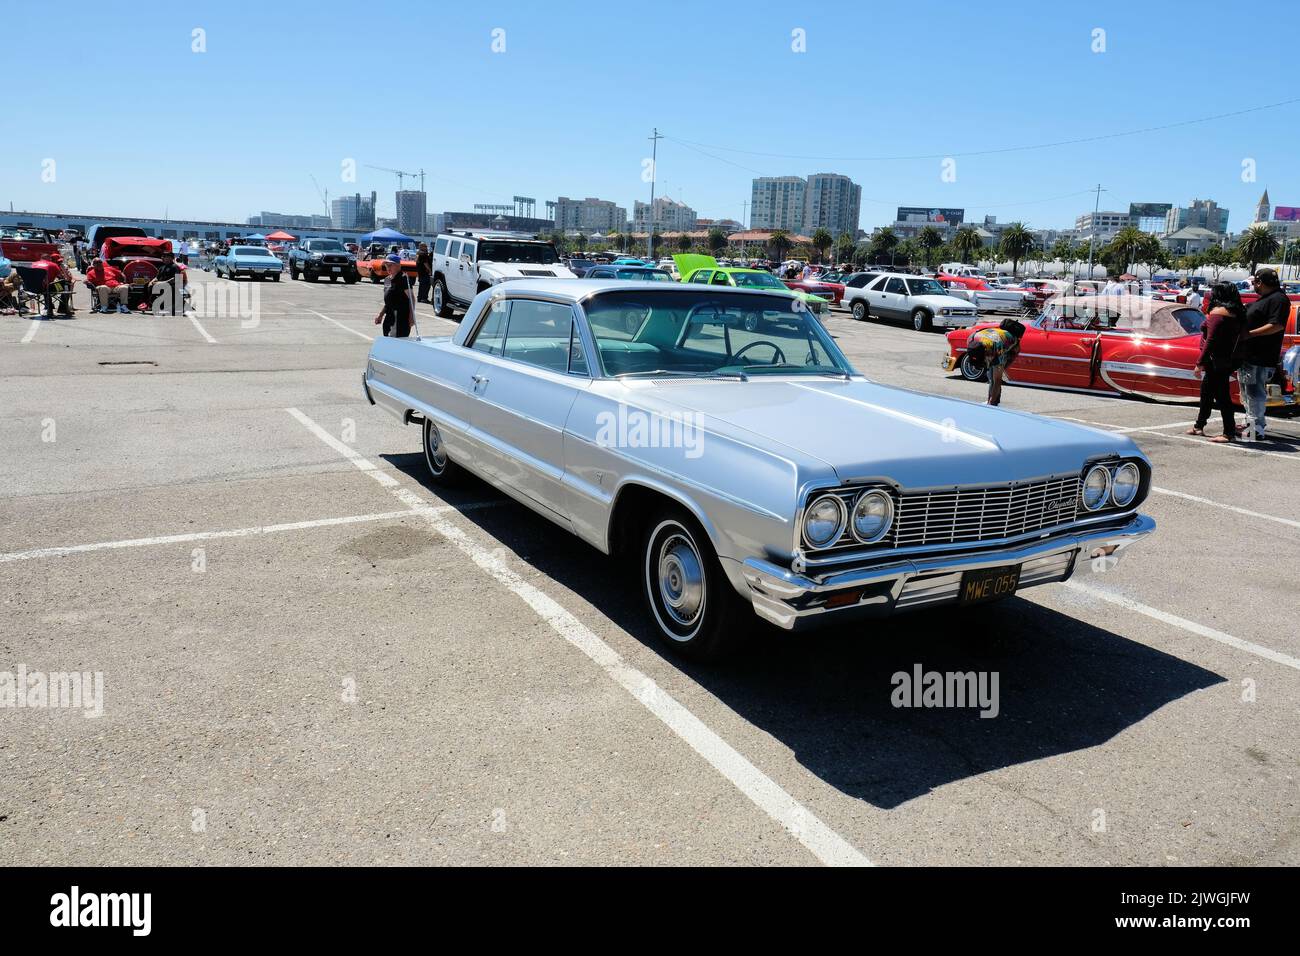 1964 Chevrolet Impala Sport Coupe at a car show in San Francisco, California; lowrider car culture. Stock Photo